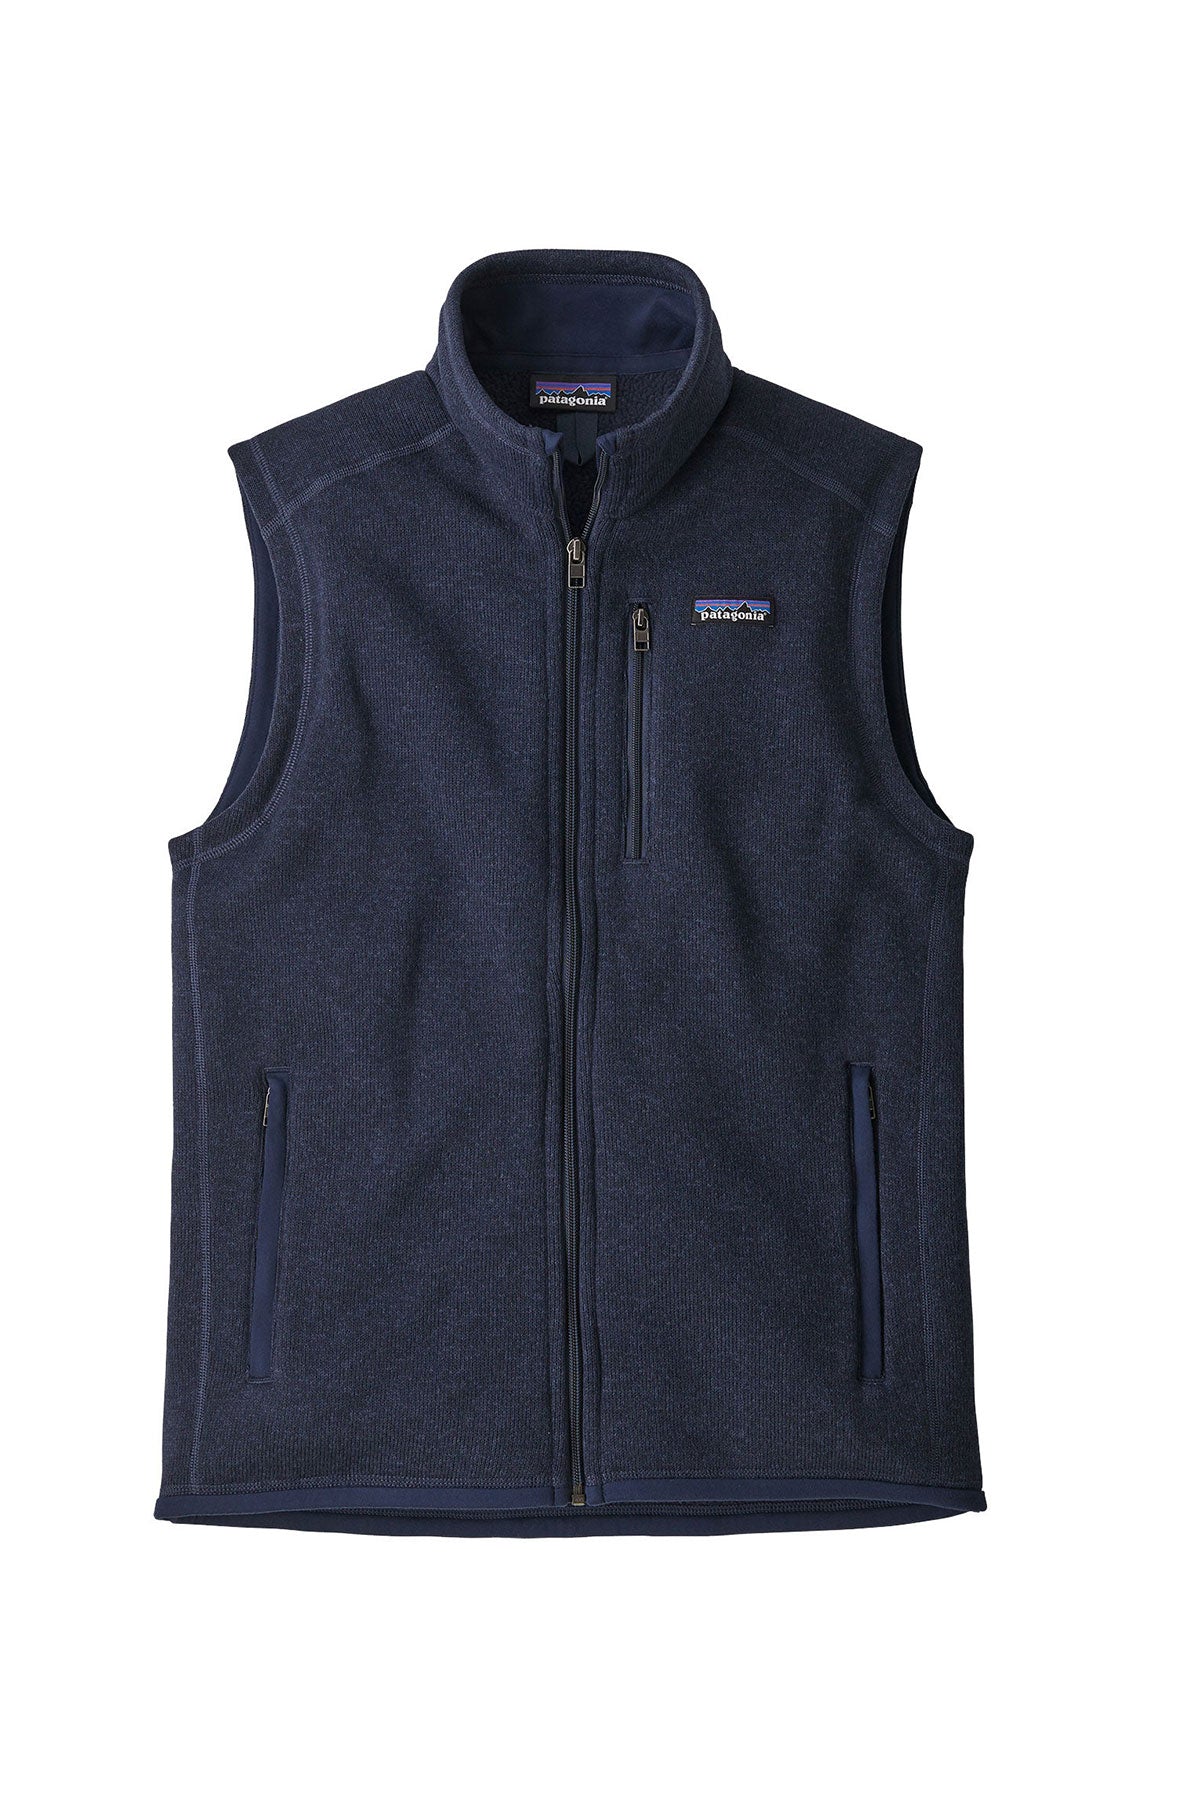 Patagonia Mens Better Sweater Fleece Customized Vests, New Navy